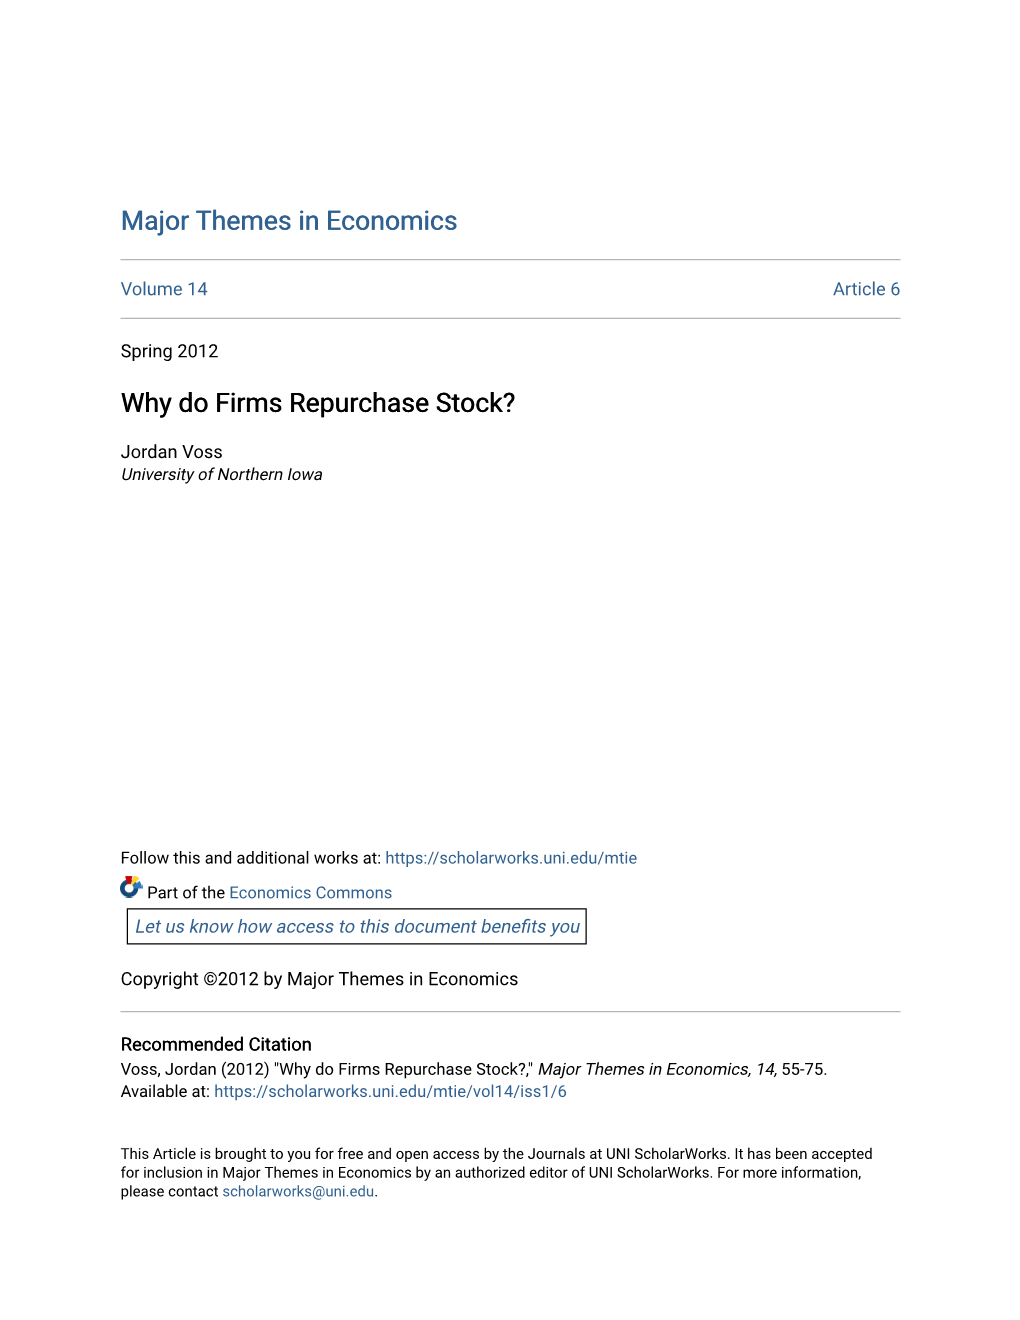 Why Do Firms Repurchase Stock?